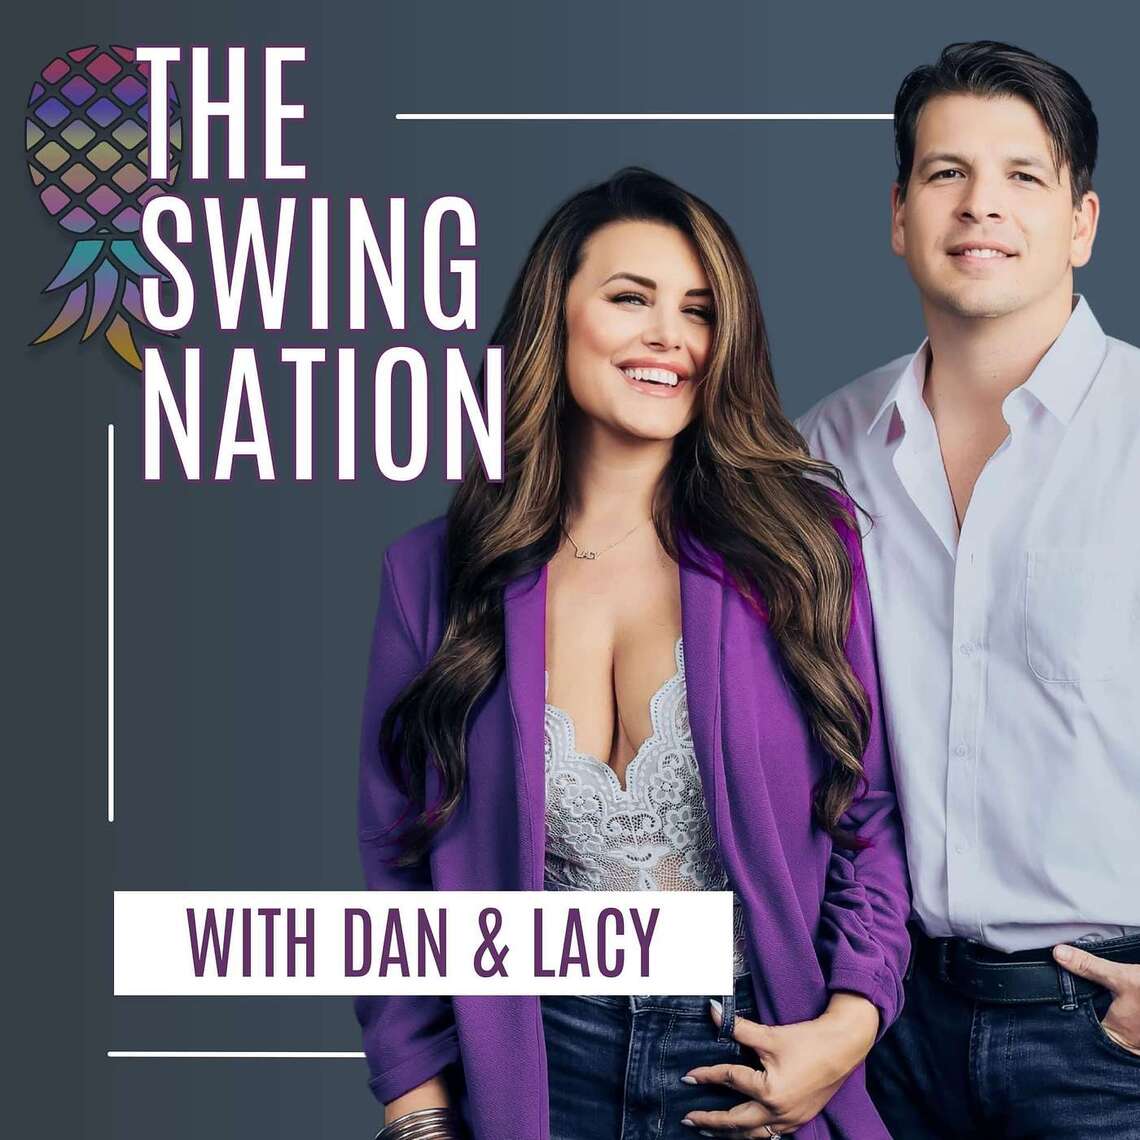 The Swing Nation - A Sex Positive Swingers